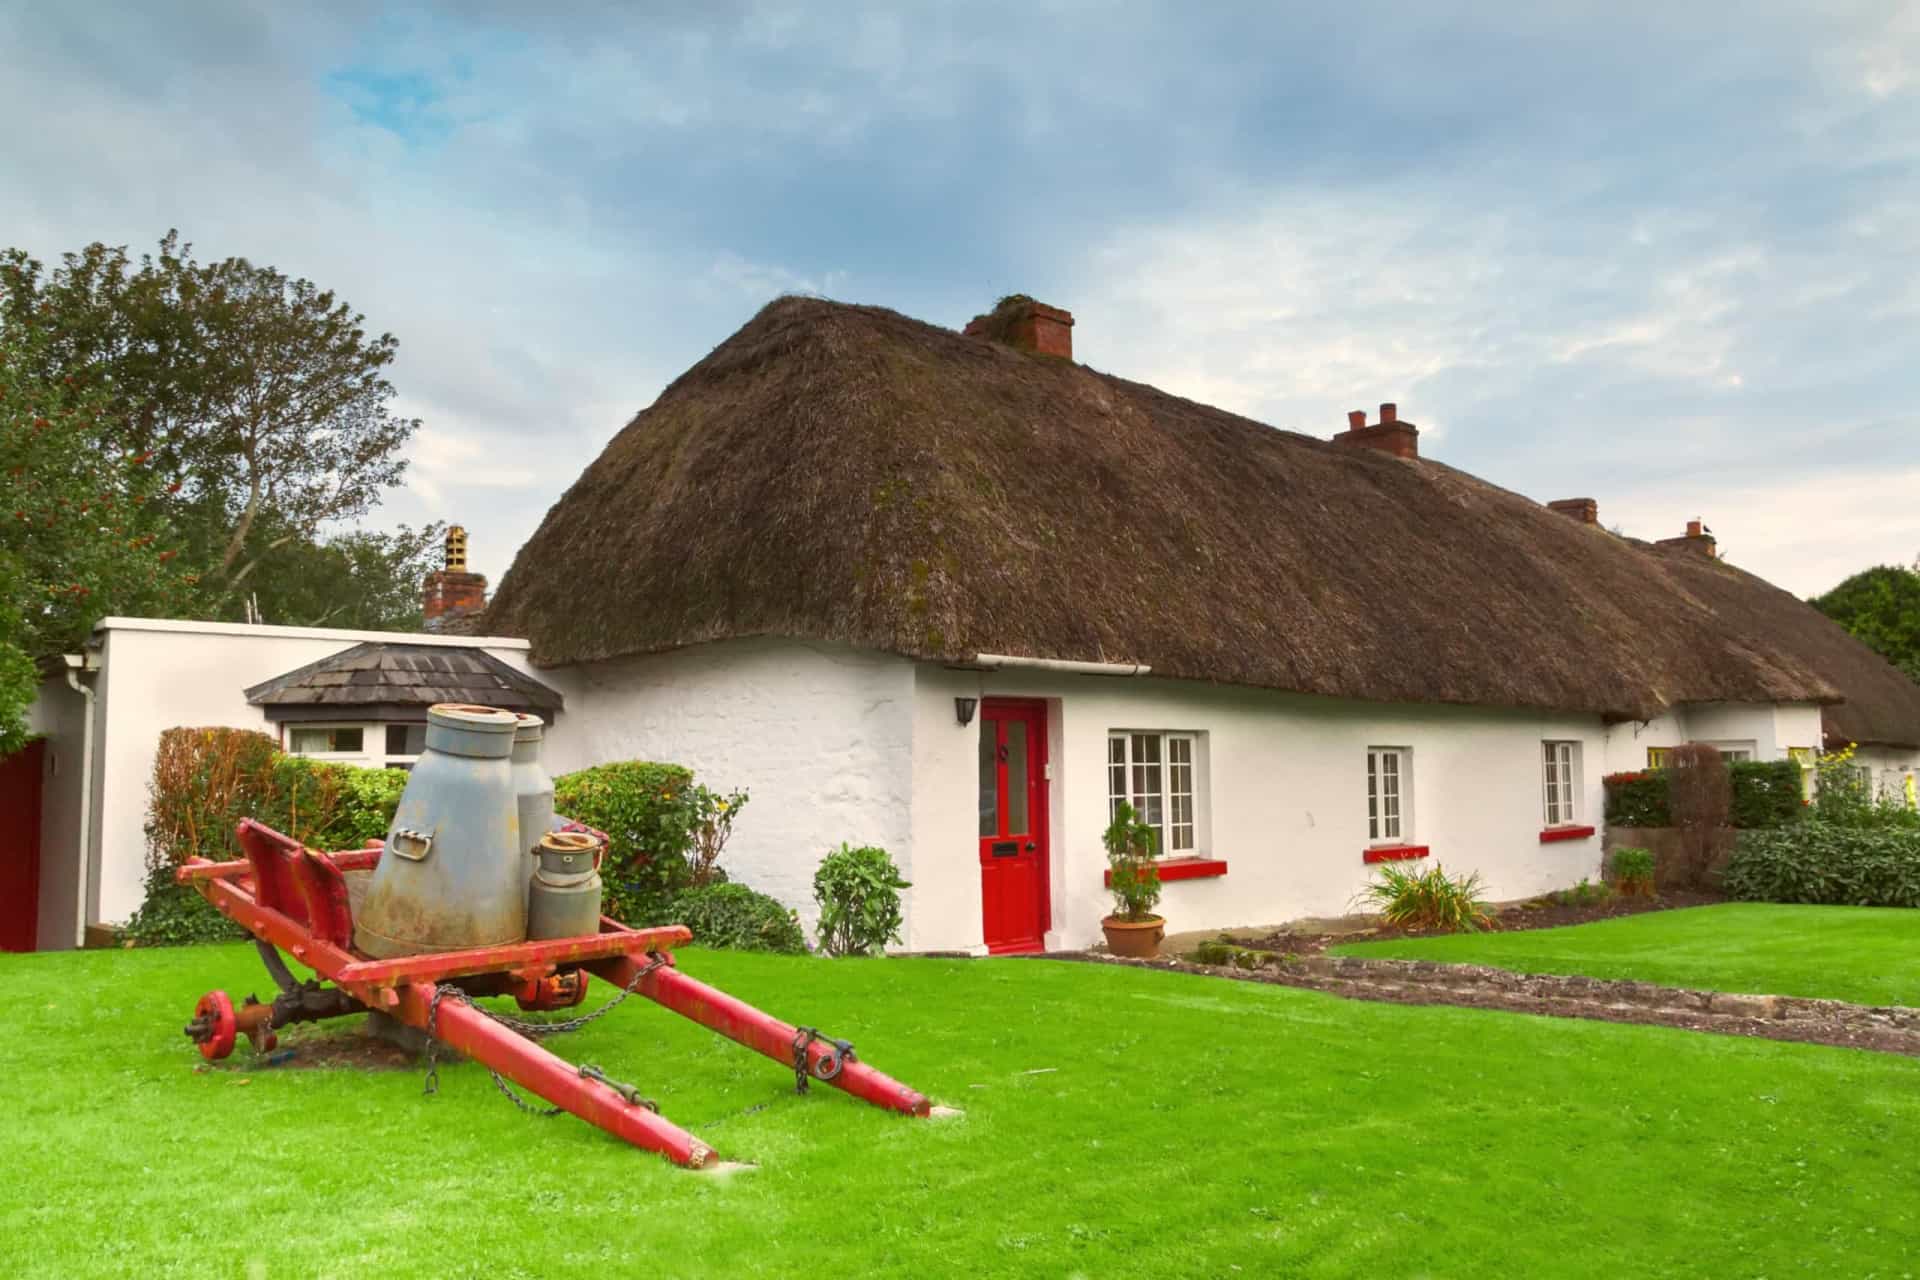 <p>Designated as a heritage town by the Irish government, points of interest in Adare include an Augustinian priory founded in 1316, Desmond Hall and Castle (not to be confused with Kinsale's castle of the same name), and several wonderfully-preserved thatched cottages near the entrance to Adare Manor.</p>